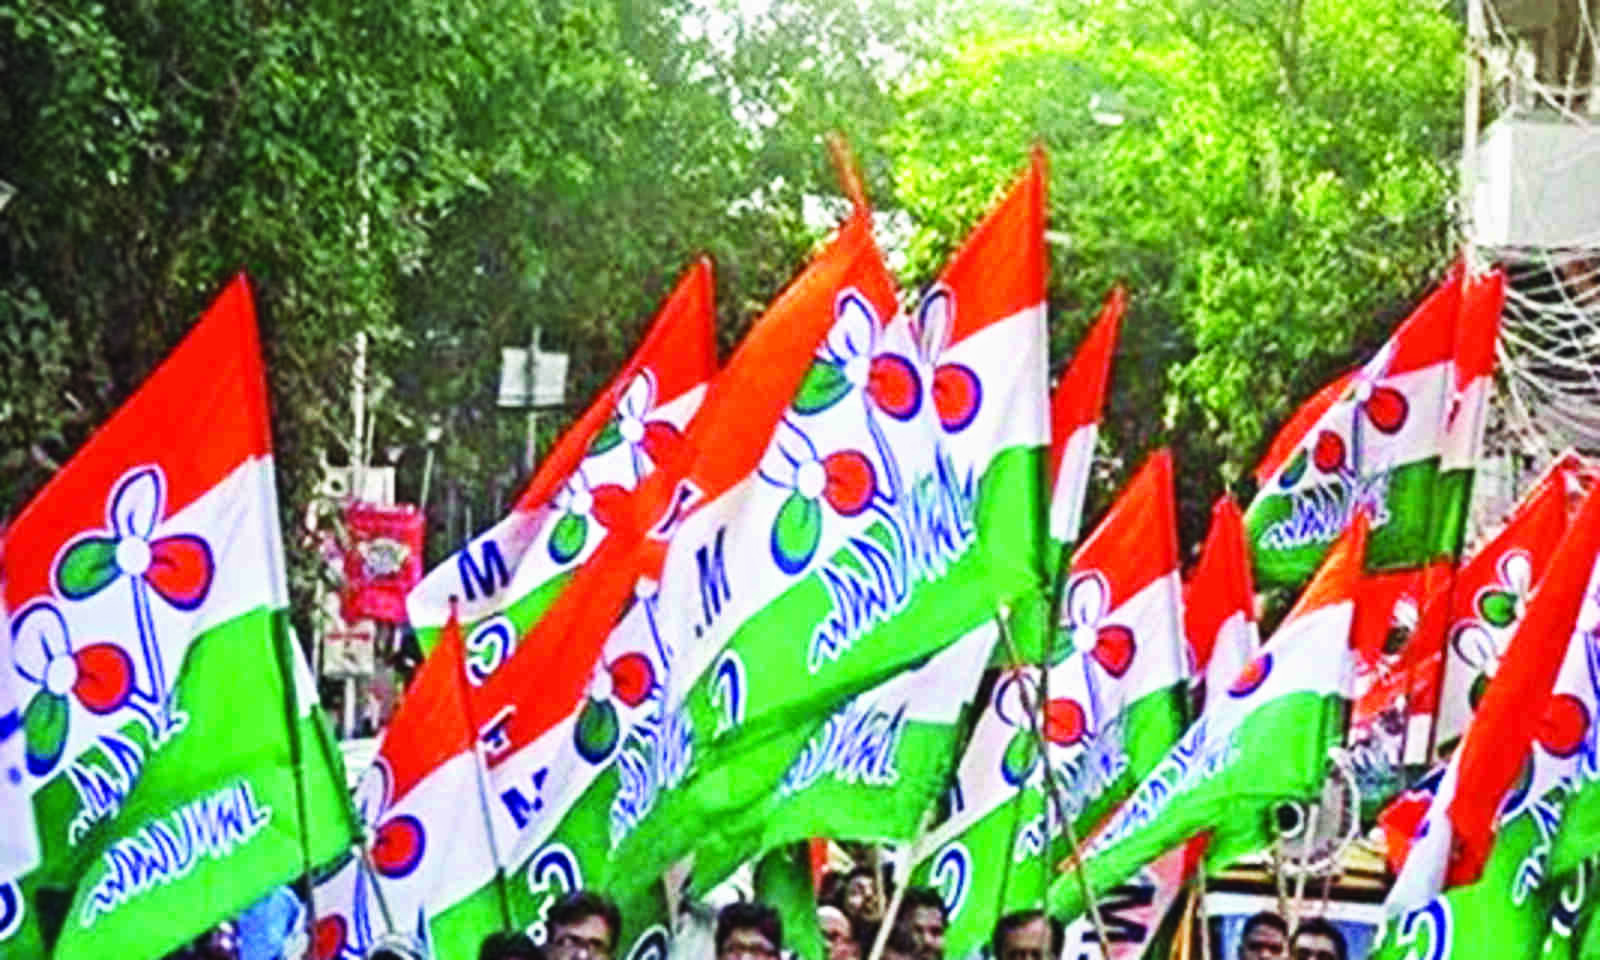 TMC leaders conclude final phase of poll campaigning